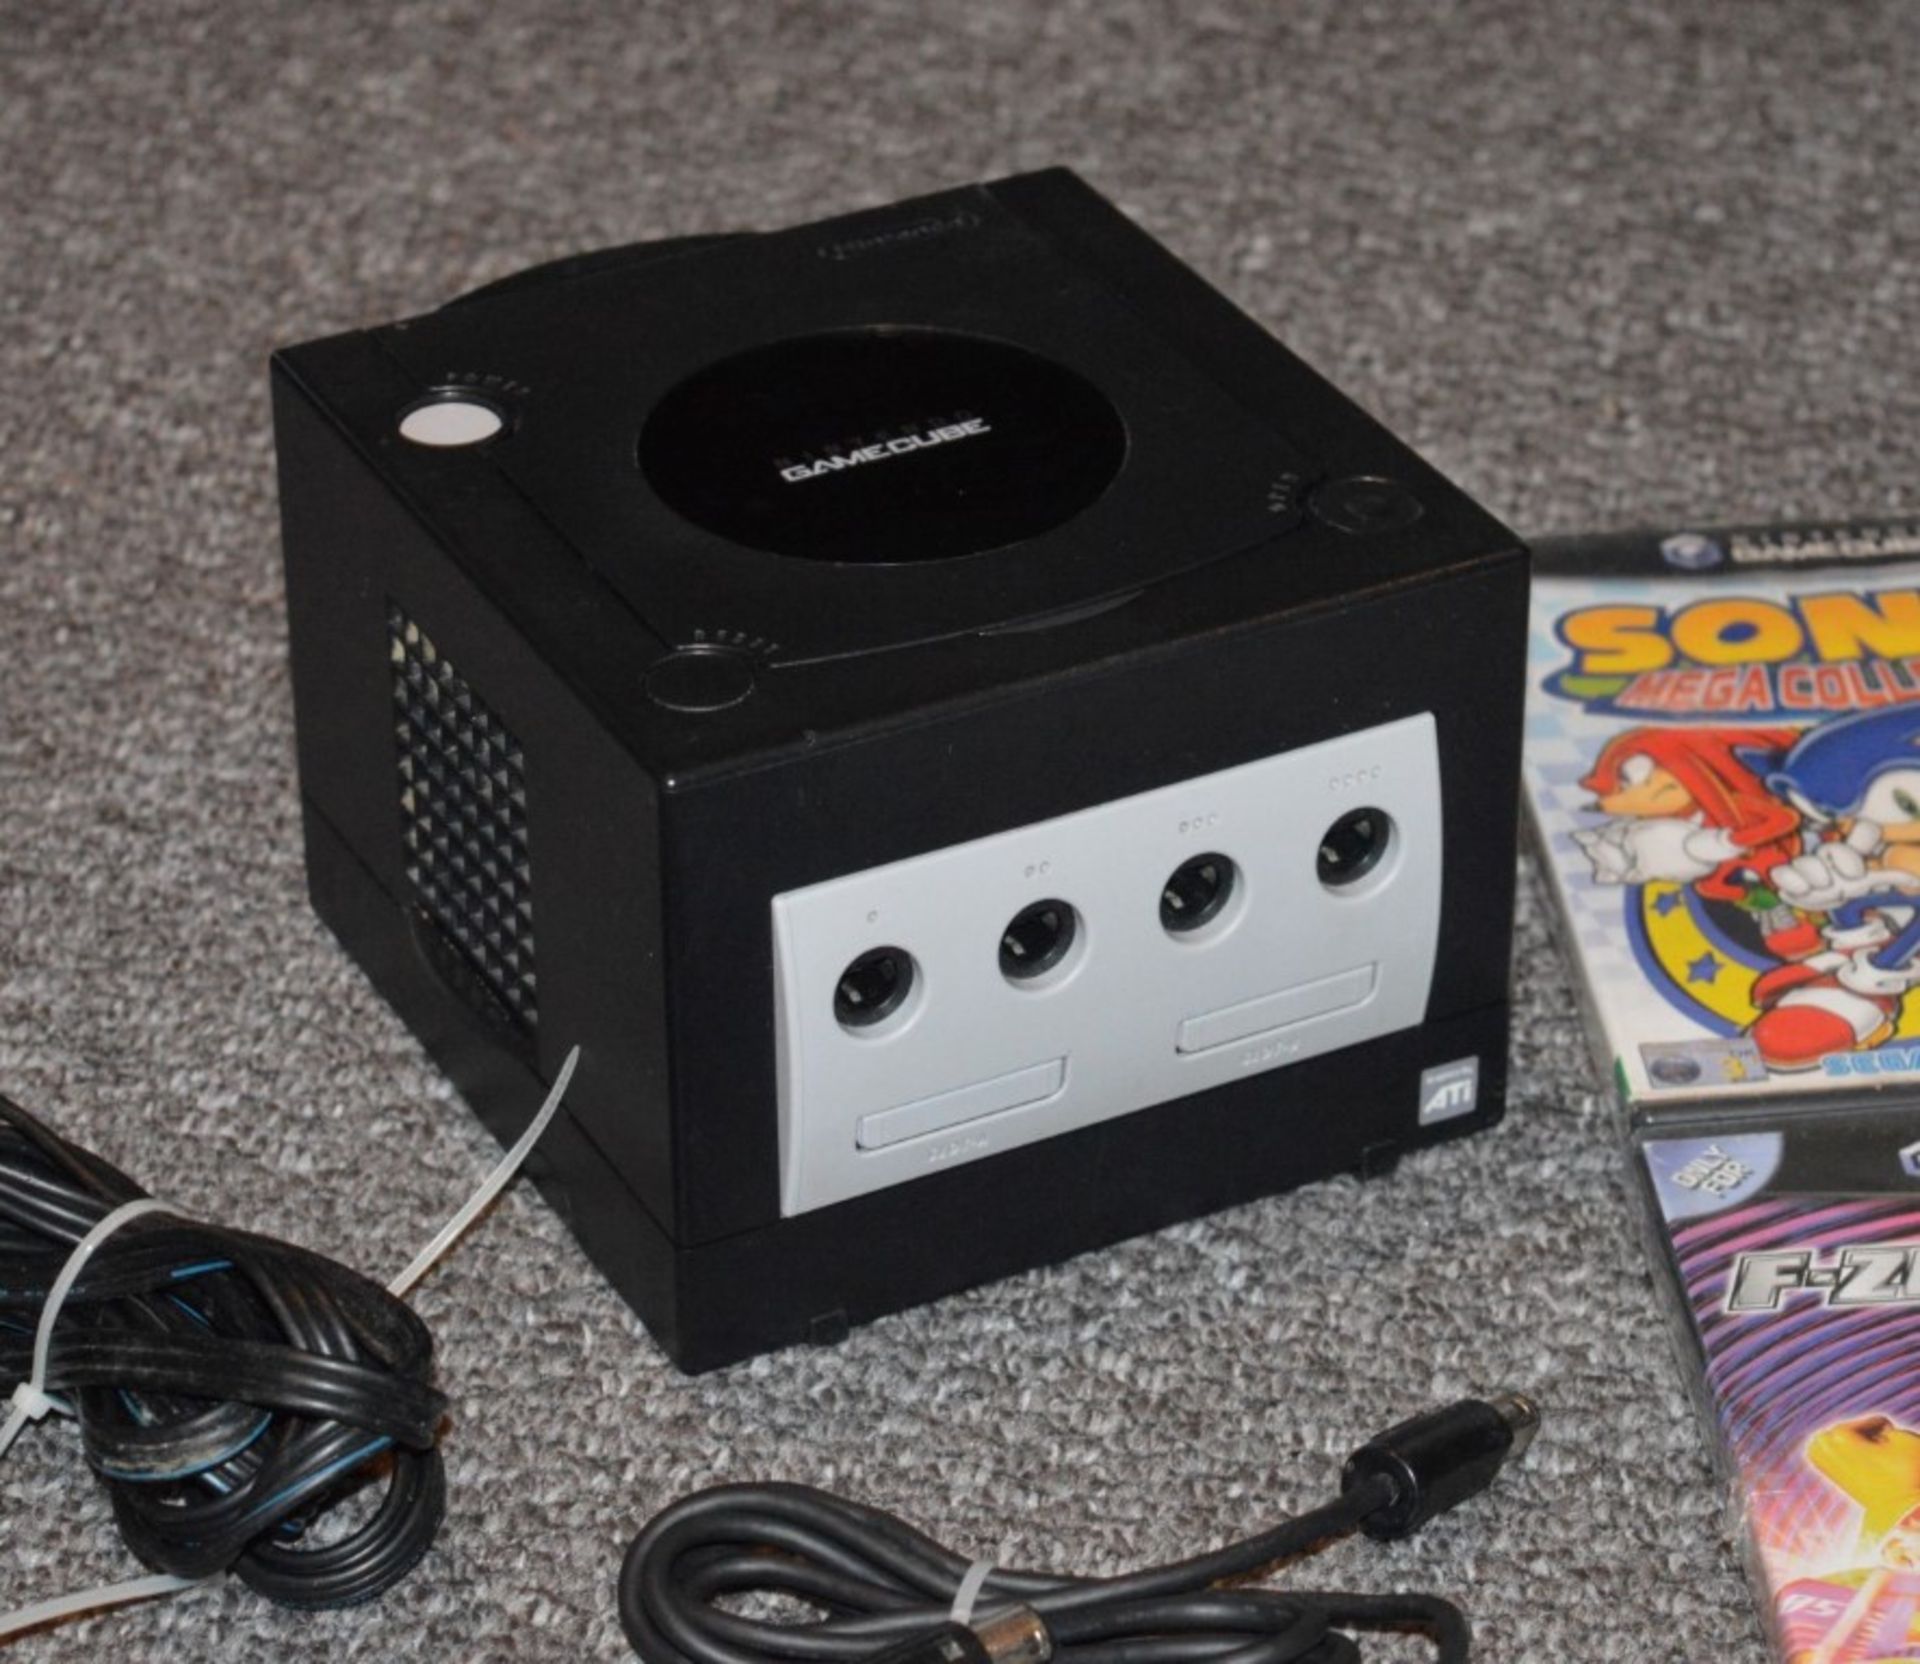 1 x Nintendo Gamecube Games Console With 2 Controllers, Power Adaptor, AV Lead, Instructions and 4 - Image 2 of 4